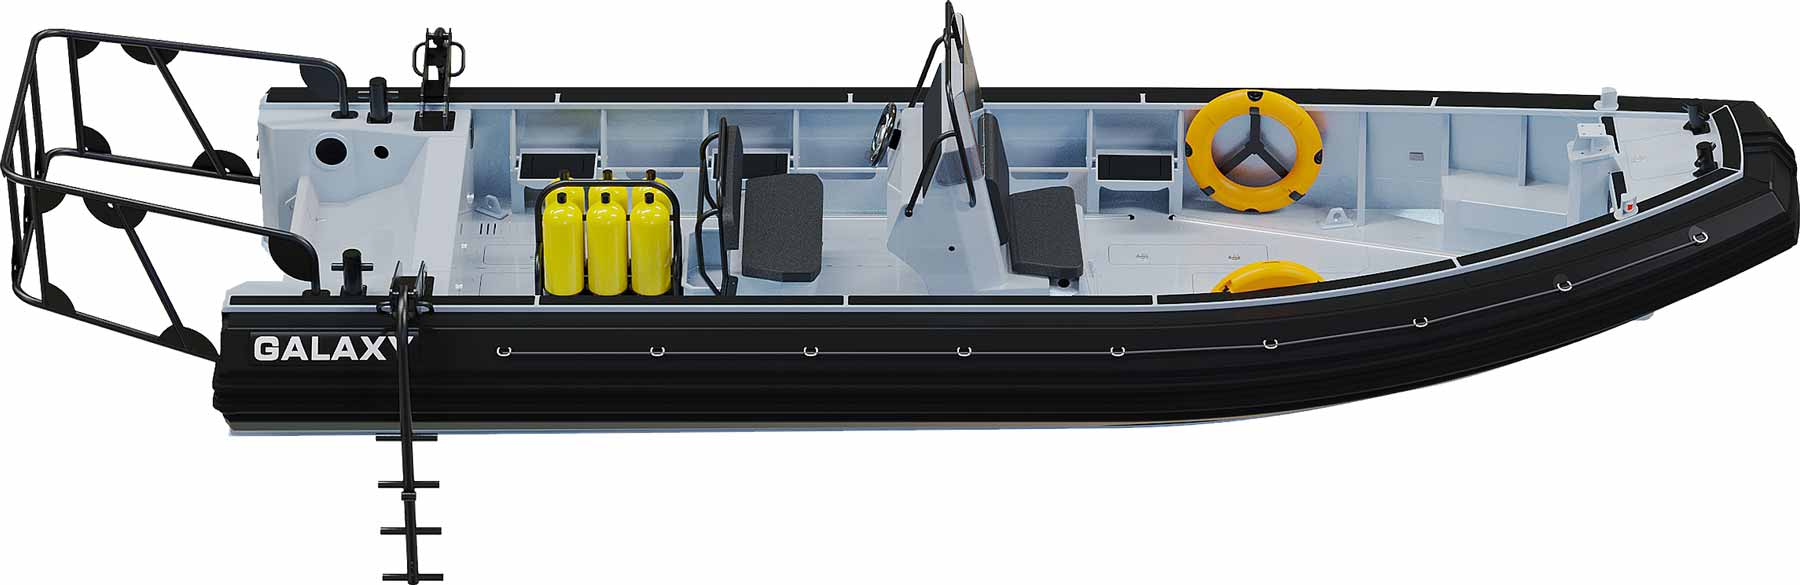 GALAXY Pro aluminum rigid inflatable boat (RIB) for professional applications that is 25’7″ foot long with steering console, tube cover, seating, storage, scuba tank rack, hand rails, ladders, and towing arch